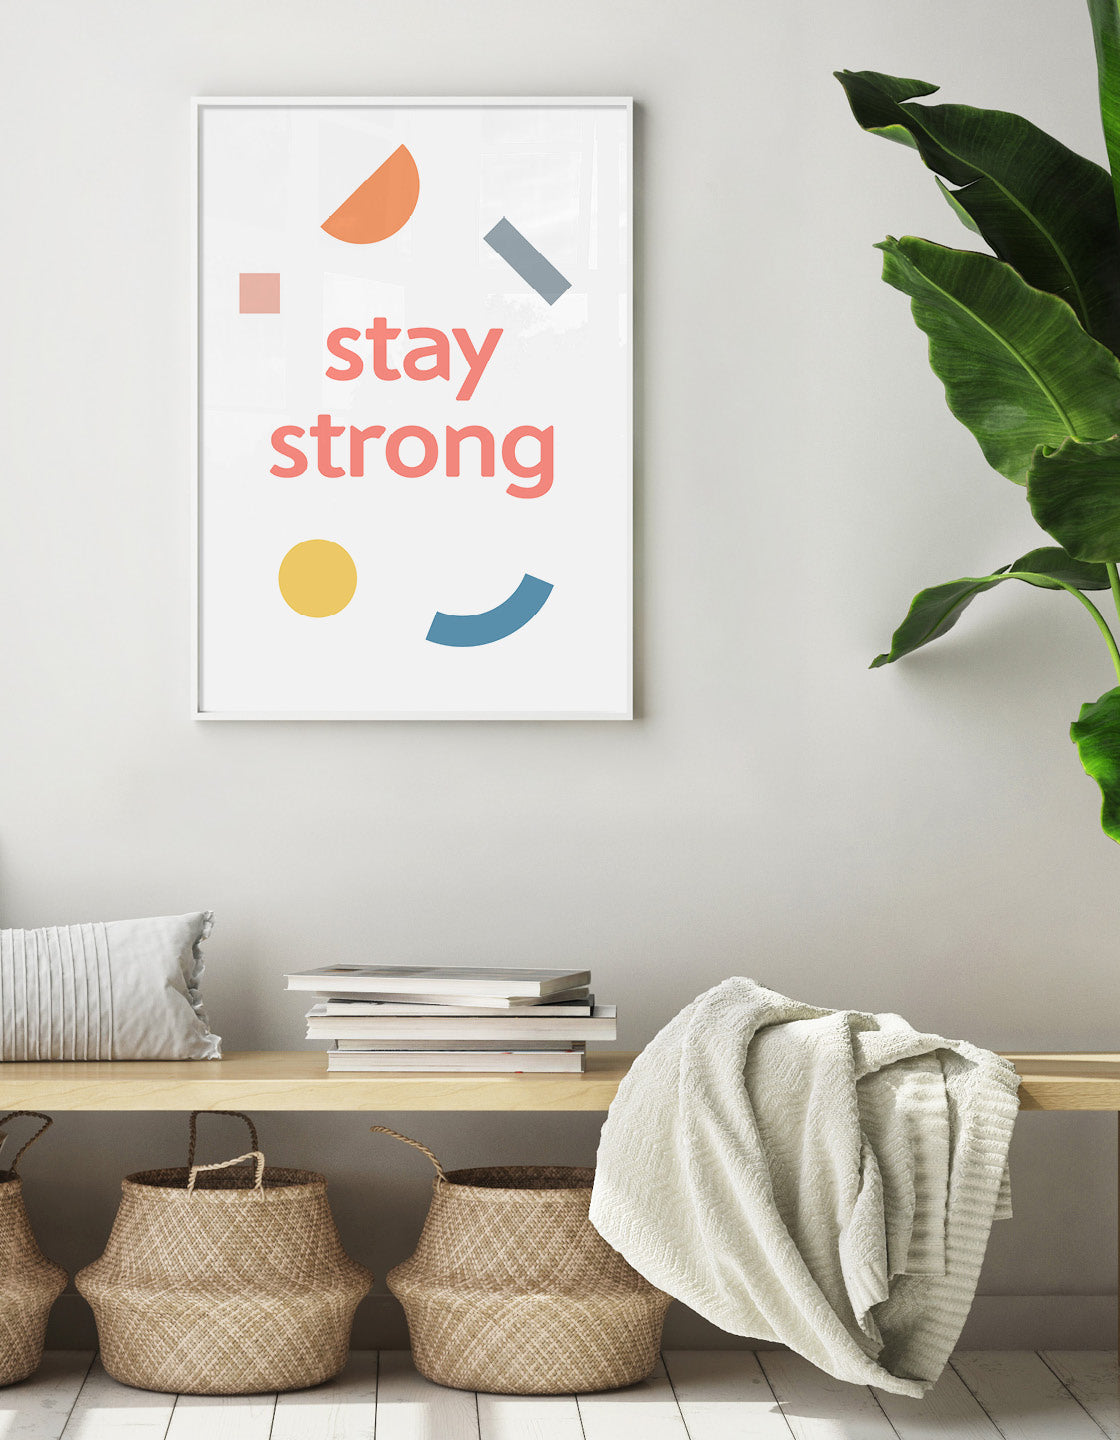 stay strong motivational typography print. Text in lowercase pink lettering against a white backgroun with multi coloured abstract shapes